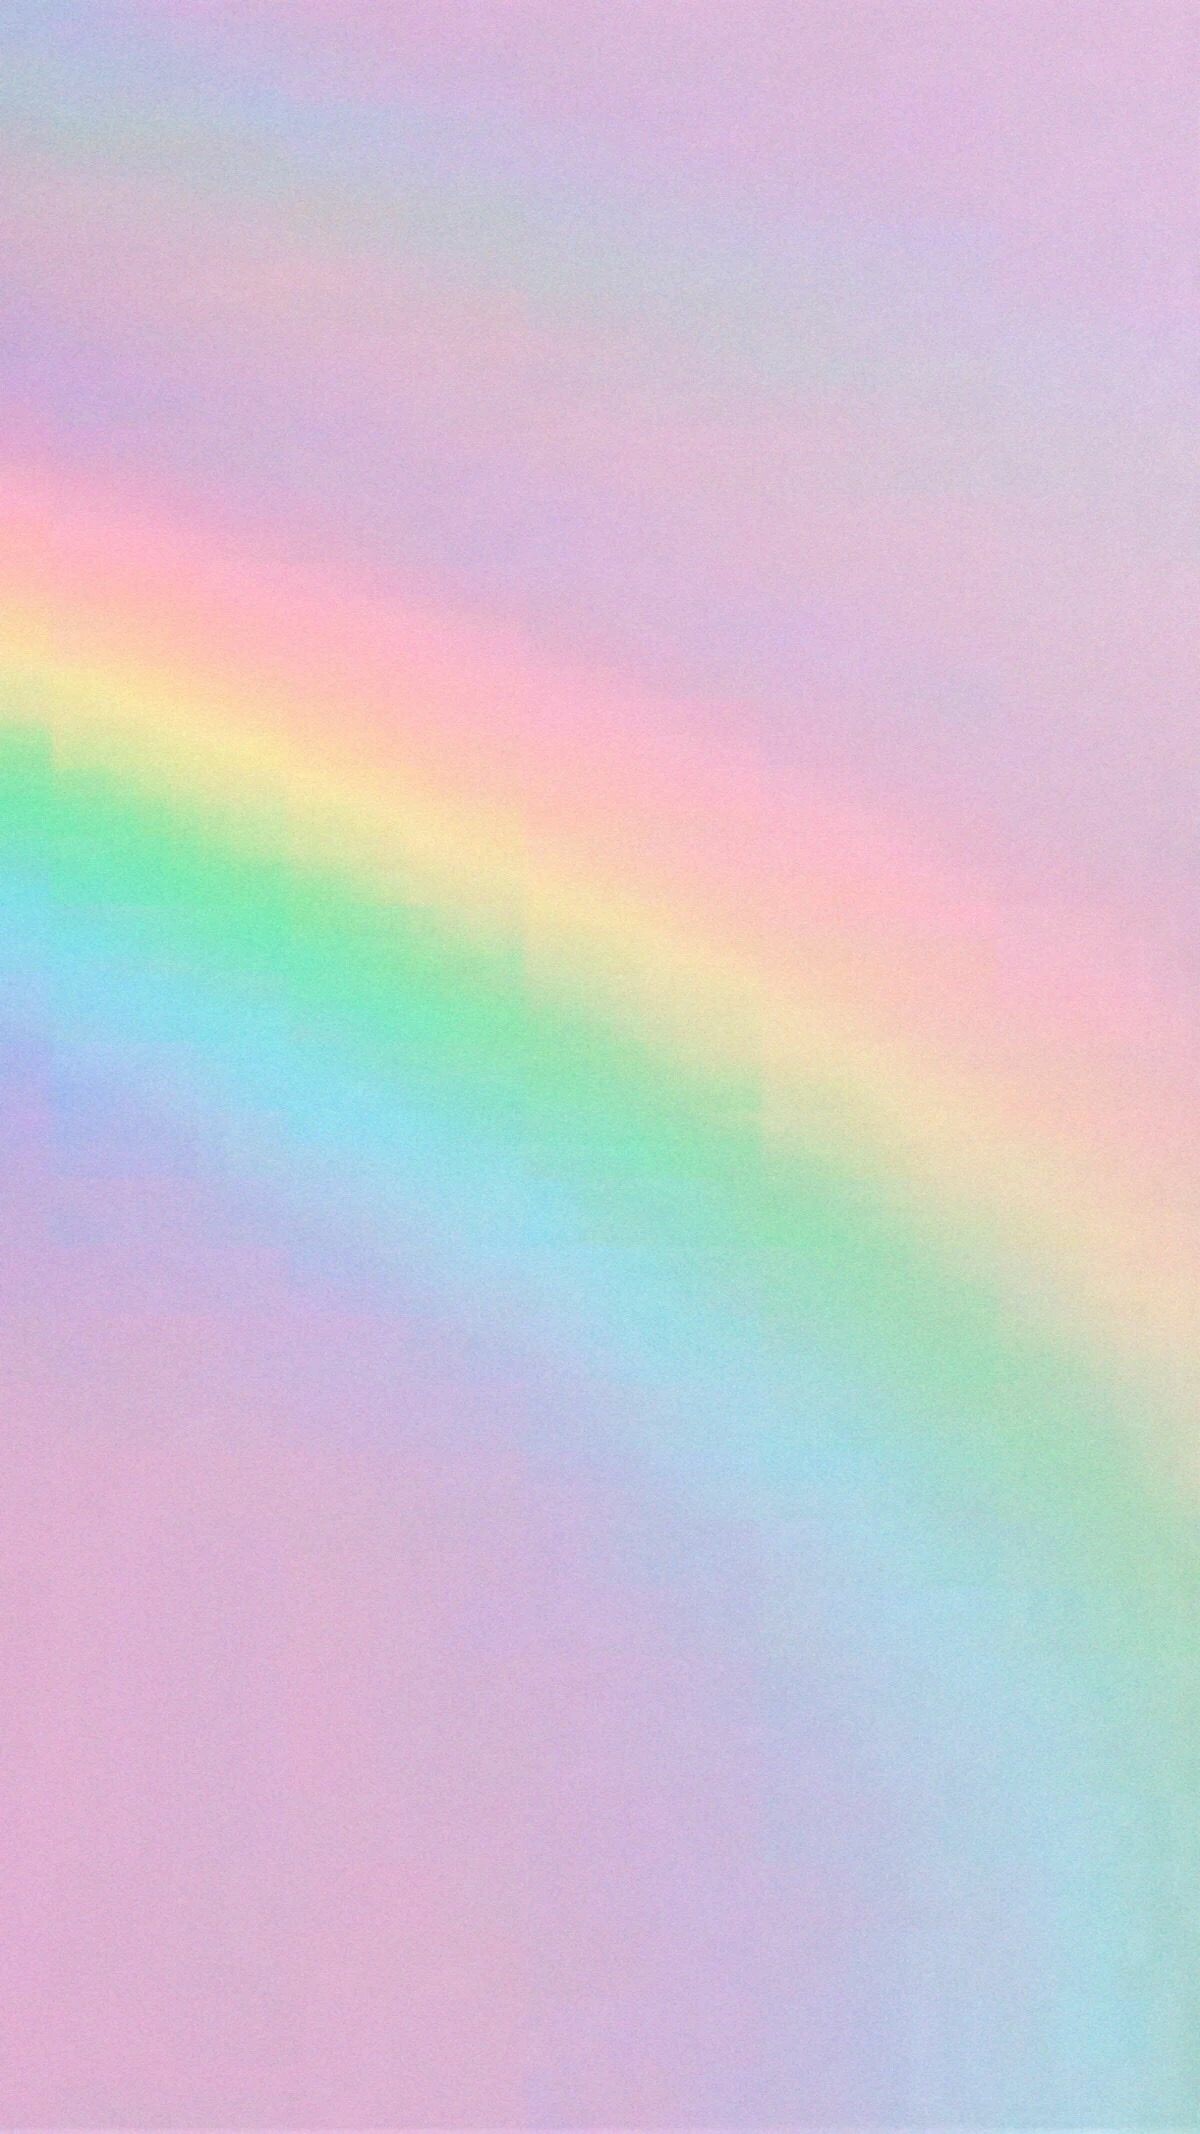 67+ Rainbow Aesthetic Wallpapers: HD, 4K, 5K for PC and Mobile | Download  free images for iPhone, Android